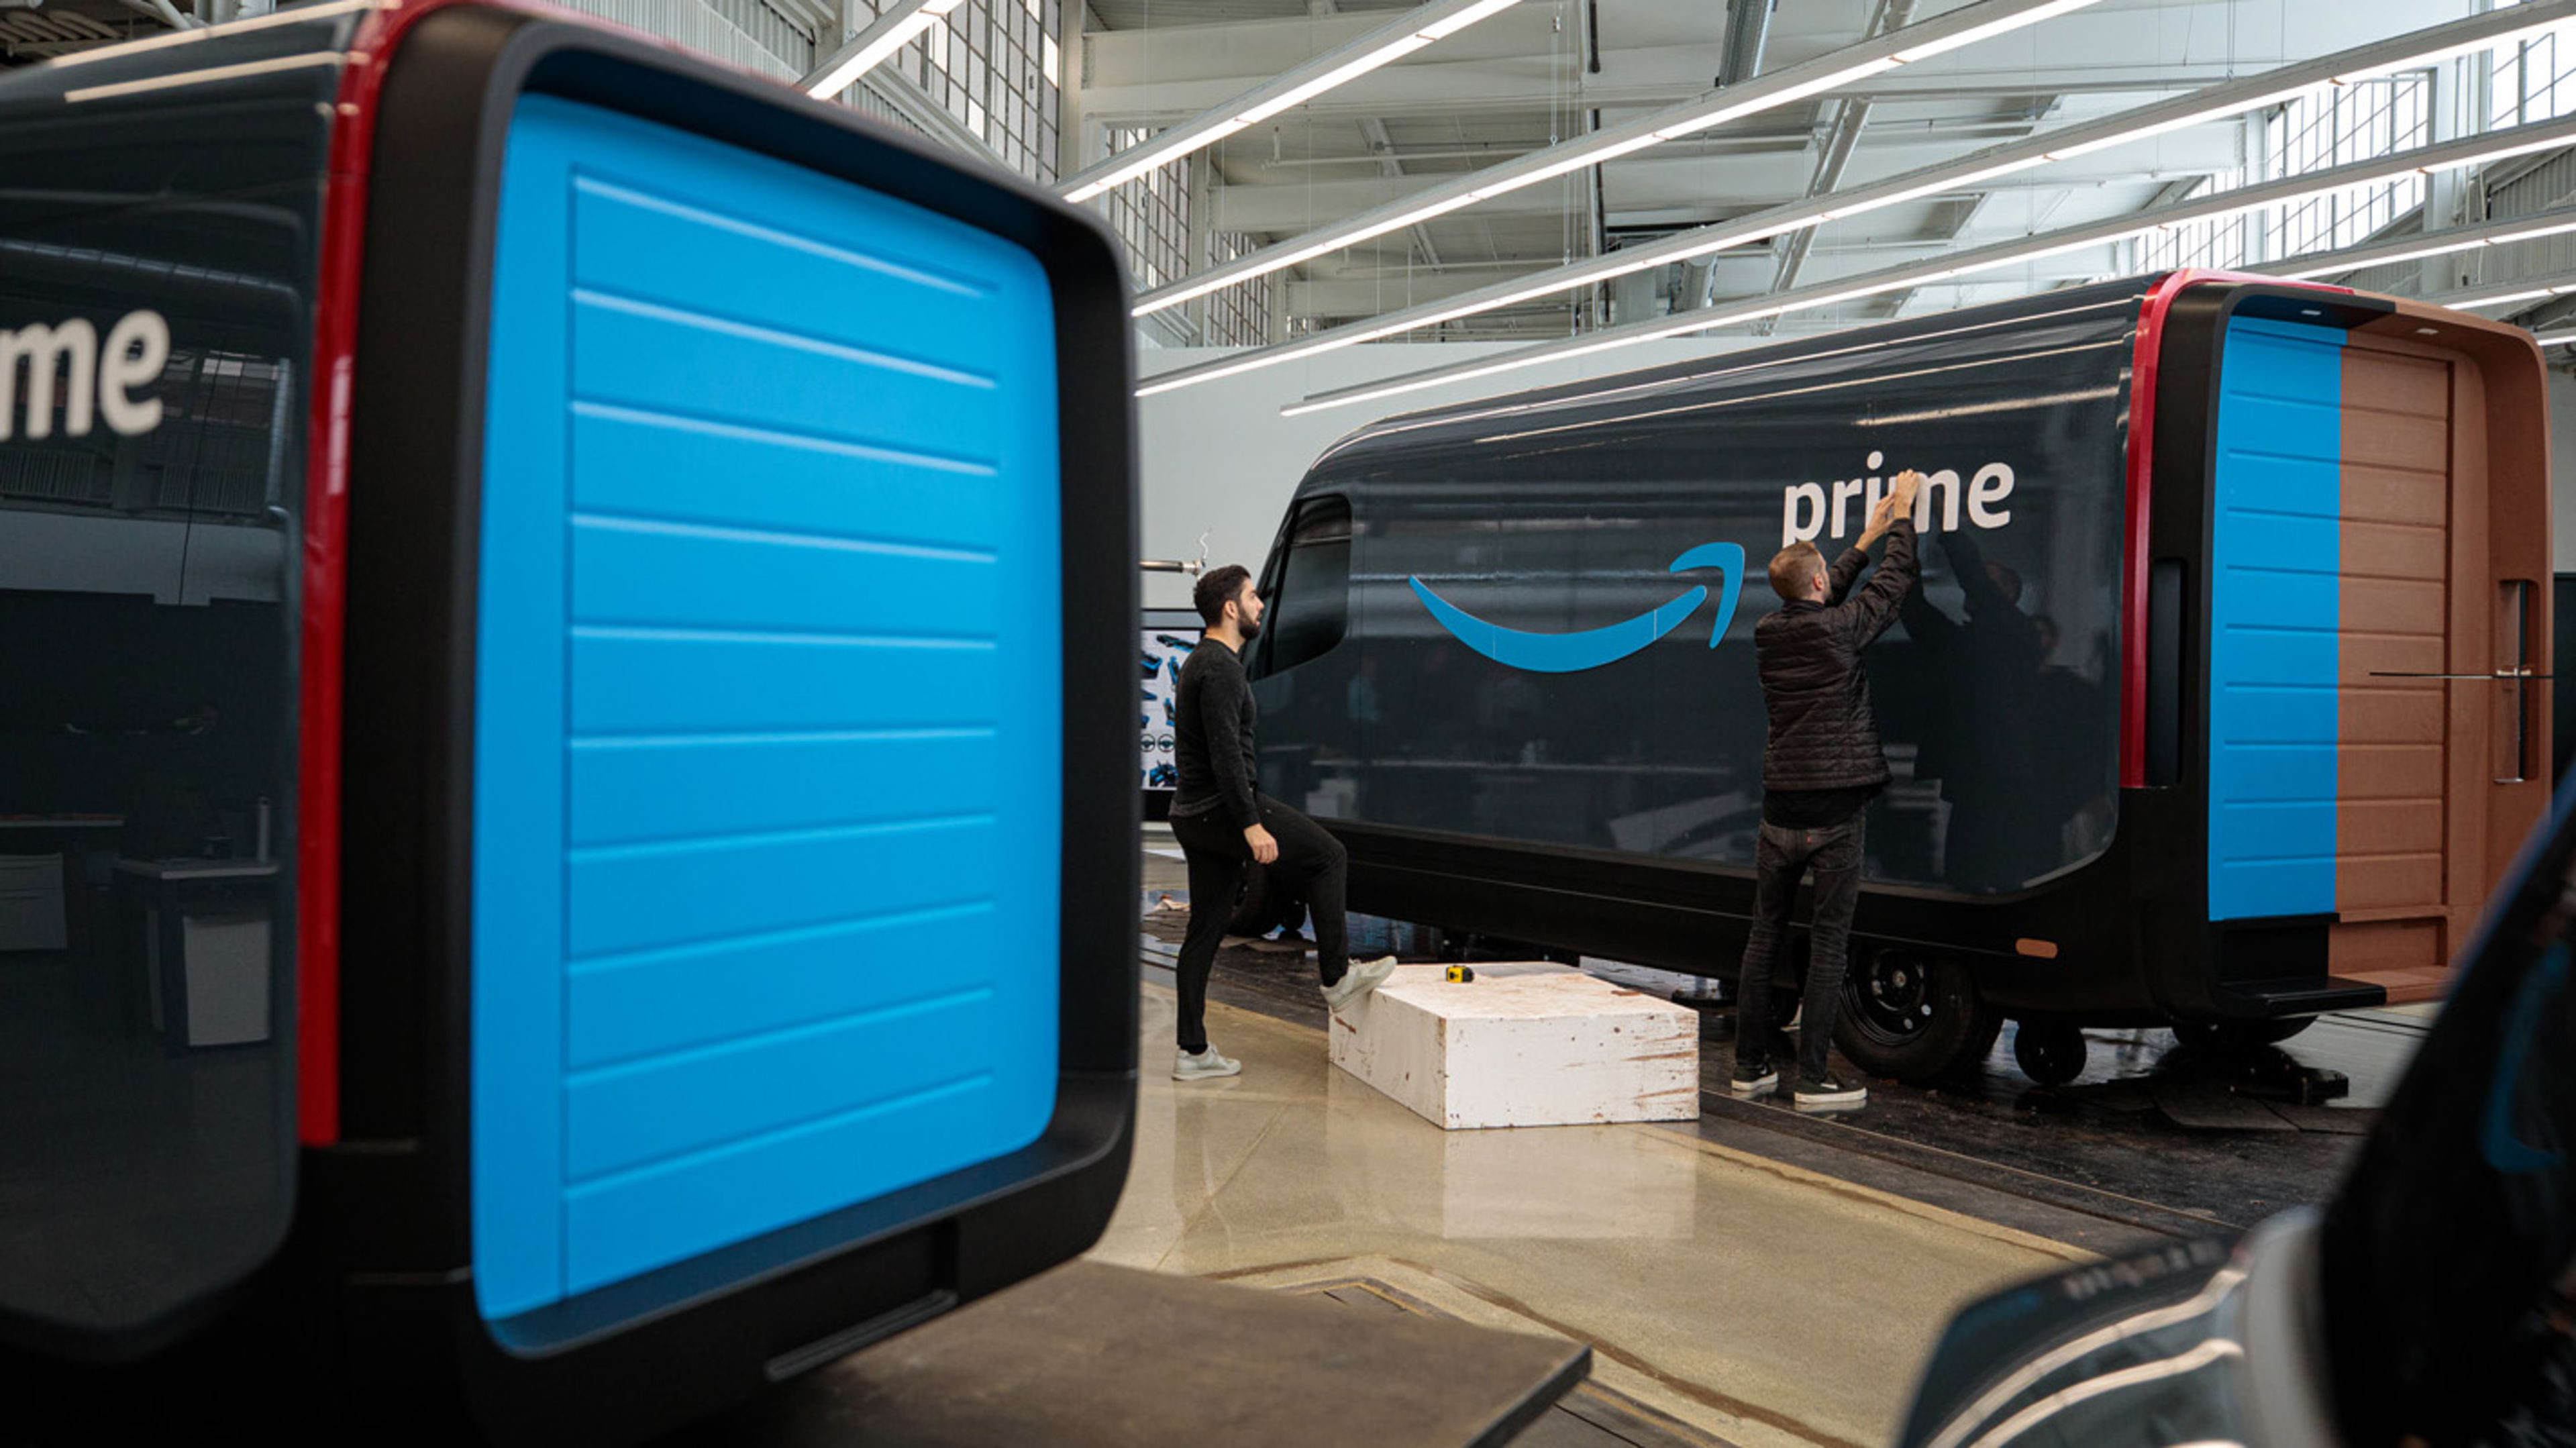 Get used to the look of Amazon’s new electric delivery van, because they’re making 100,000 of them